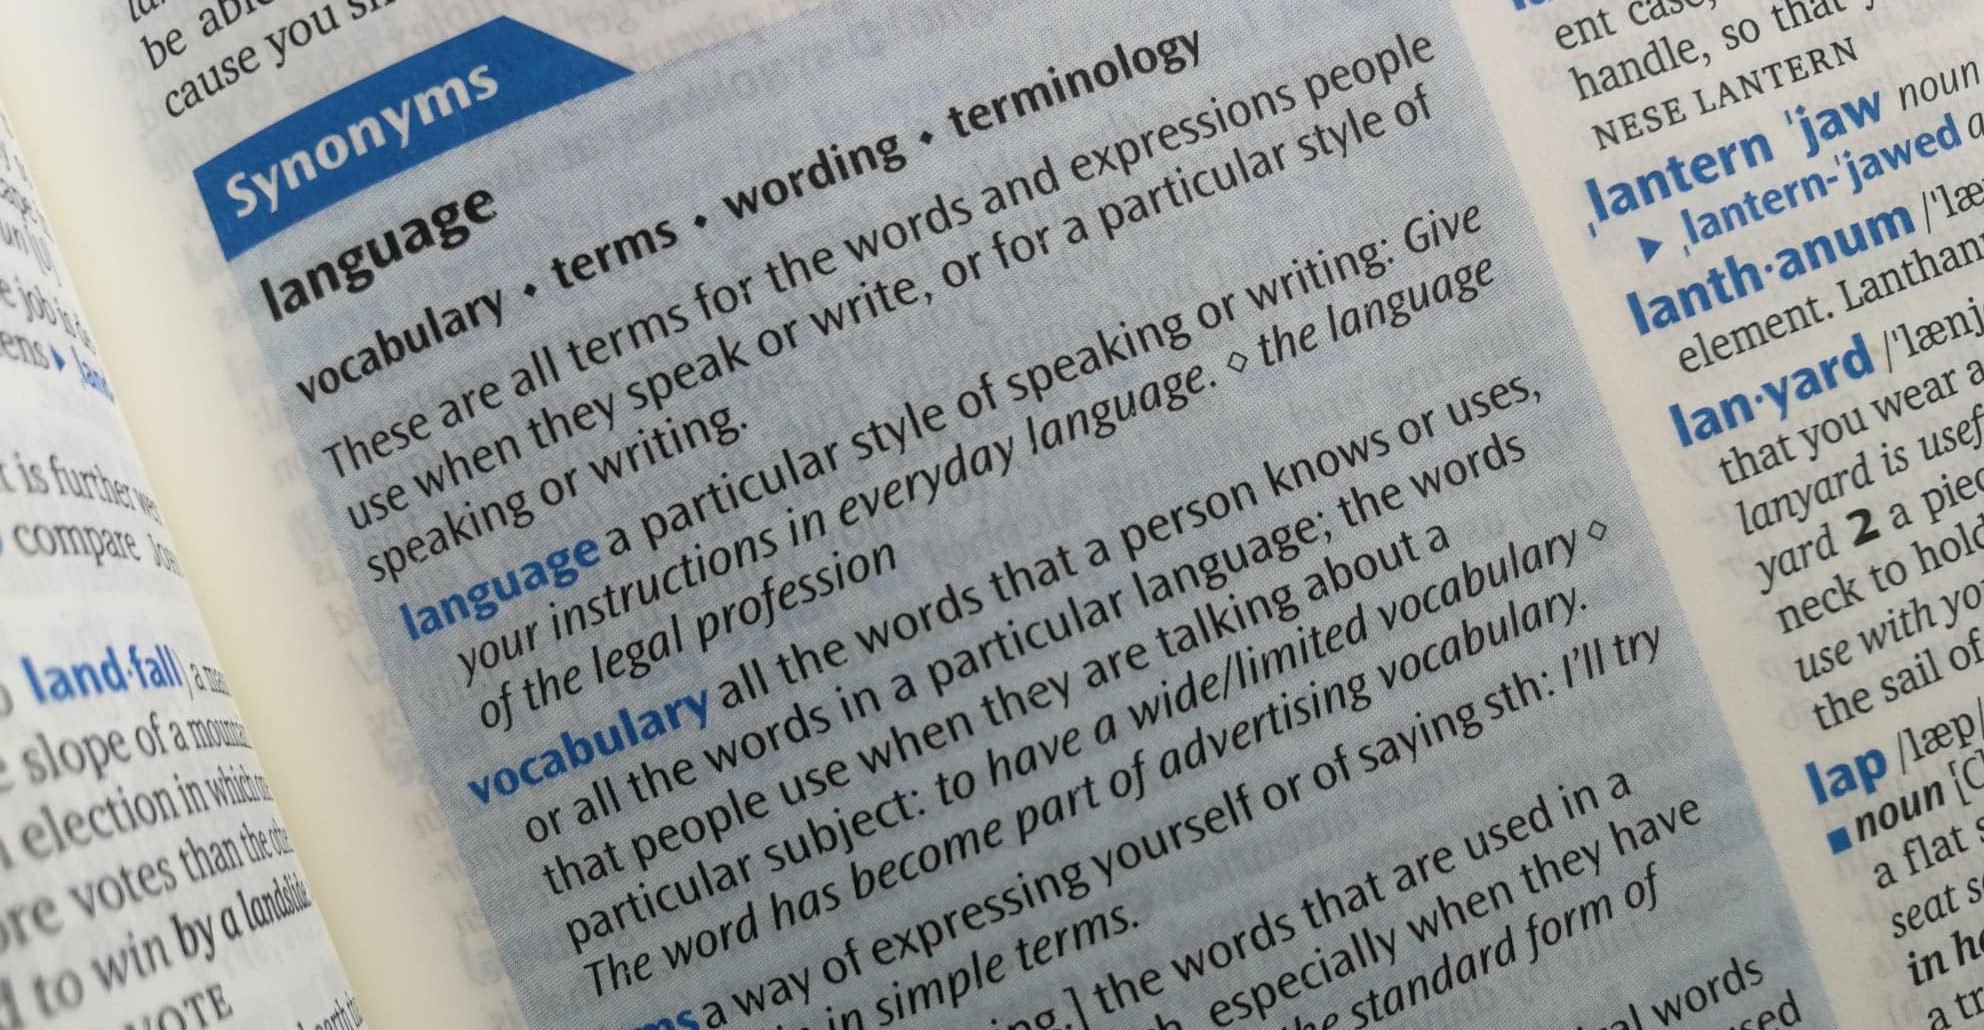 Close-up image from the Oxford English Dictionary.